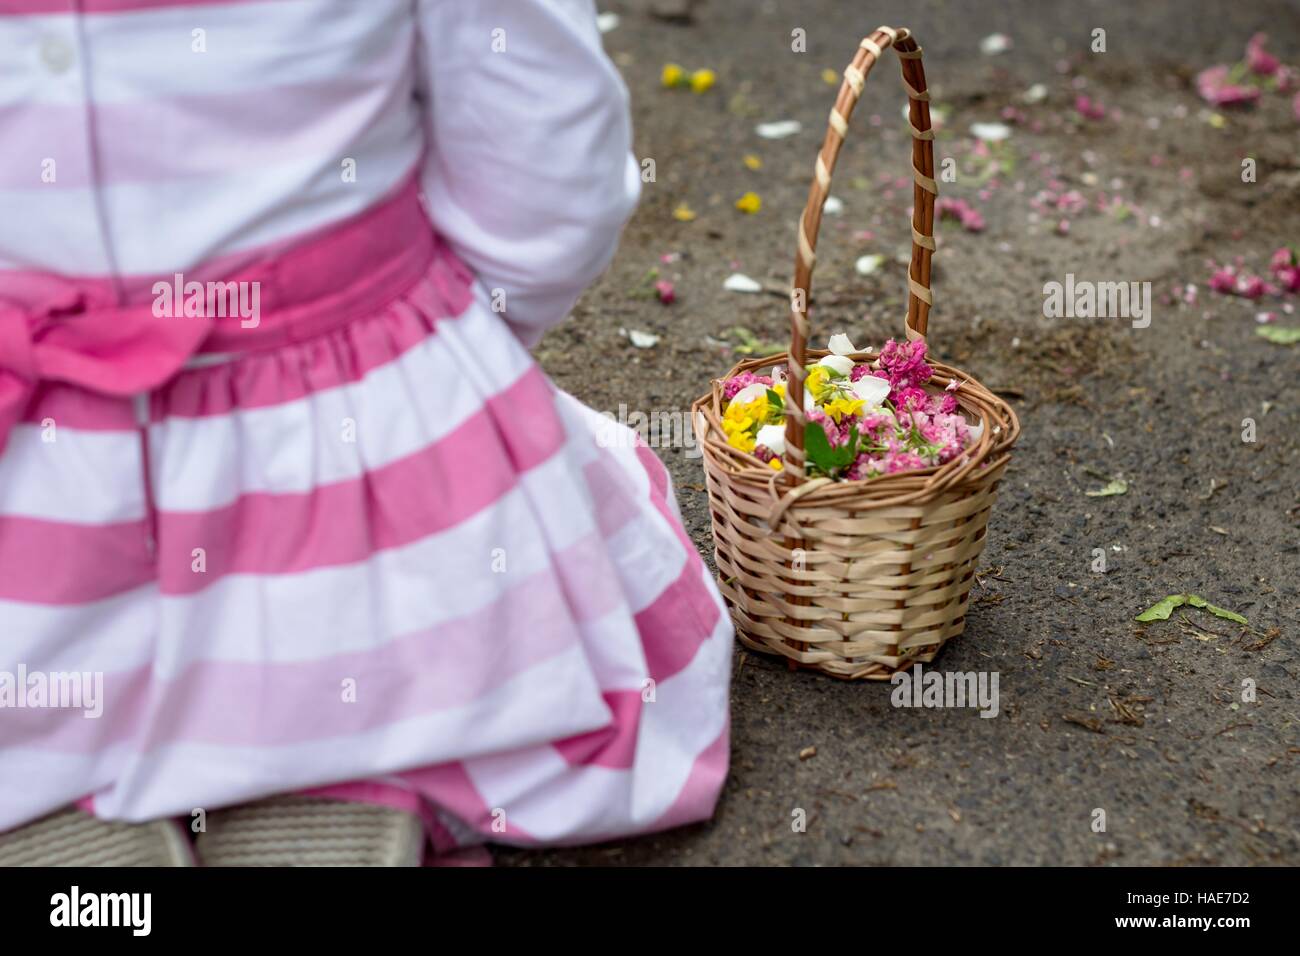 girl with a basket full of flower petals Stock Photo